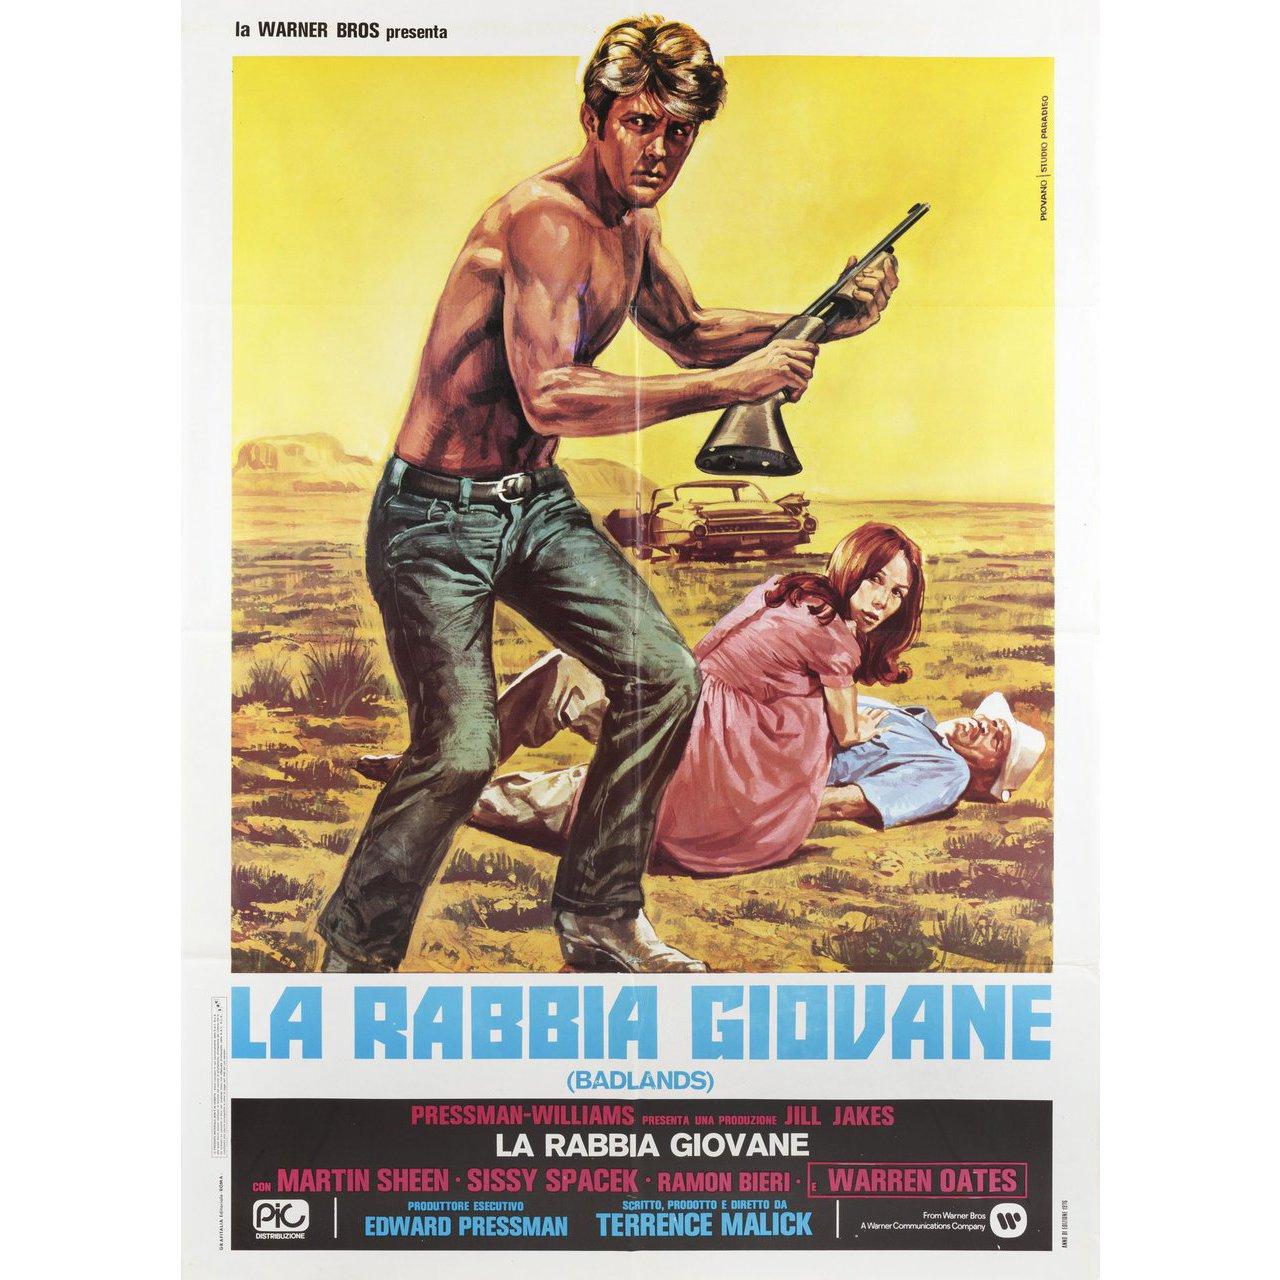 Original 1976 Italian due fogli poster for the 1973 film Badlands directed by Terrence Malick with Martin Sheen / Sissy Spacek / Warren Oates / Ramon Bieri. Very Good-Fine condition, folded. Many original posters were issued folded or were